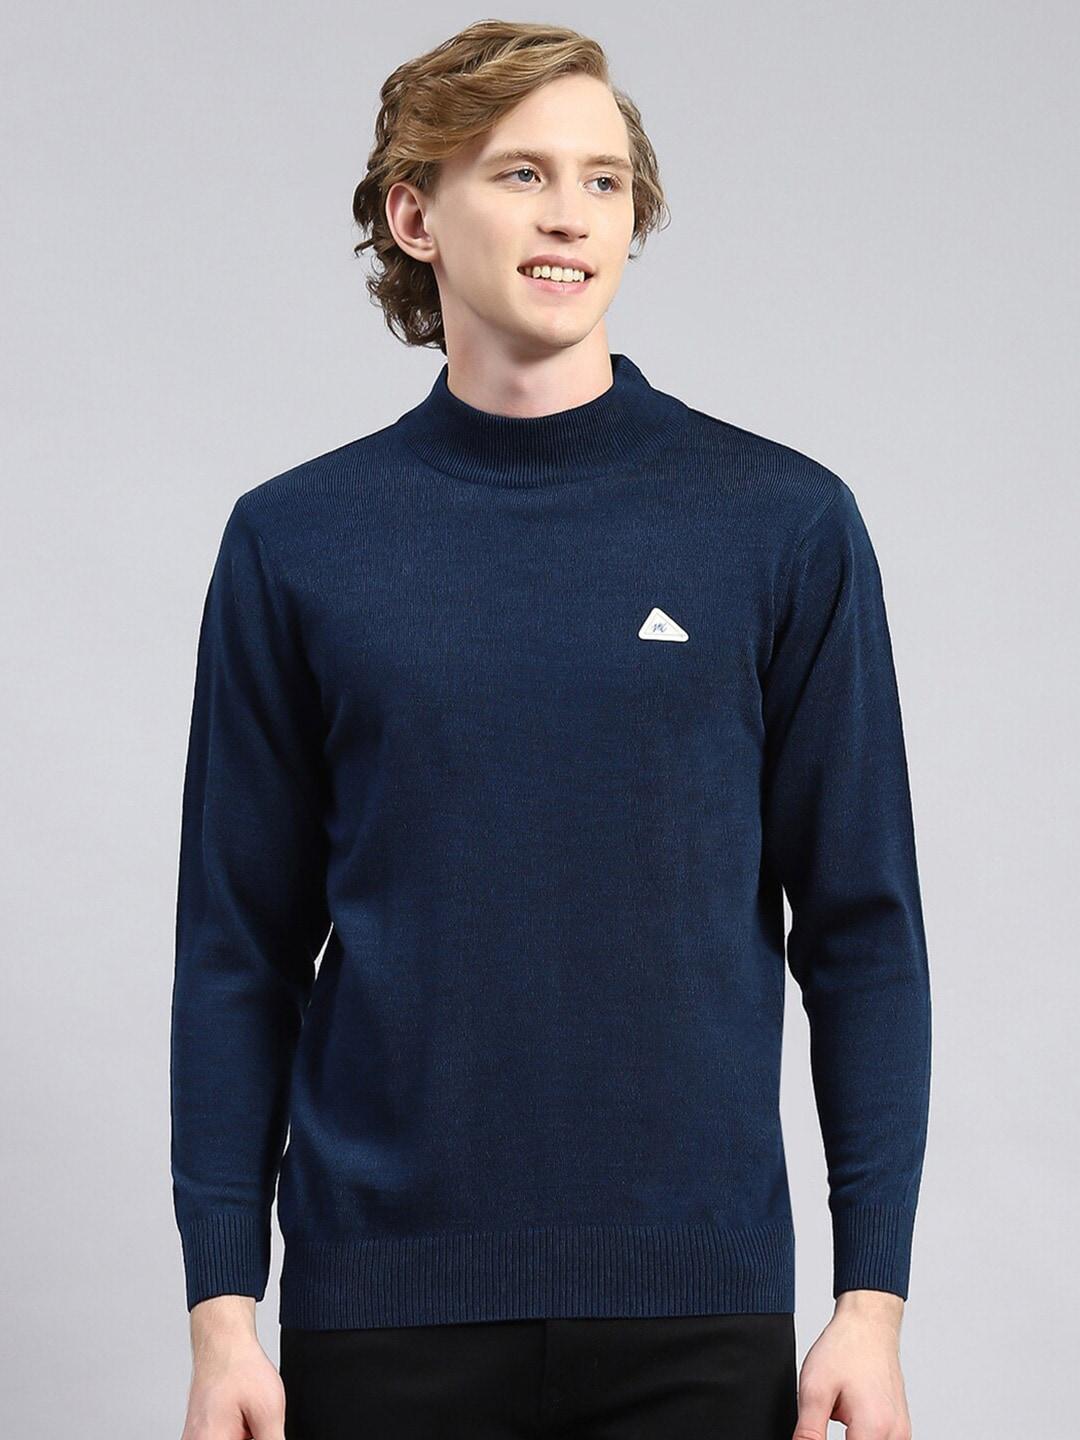 Monte Carlo High Neck Long Sleeves Pullover